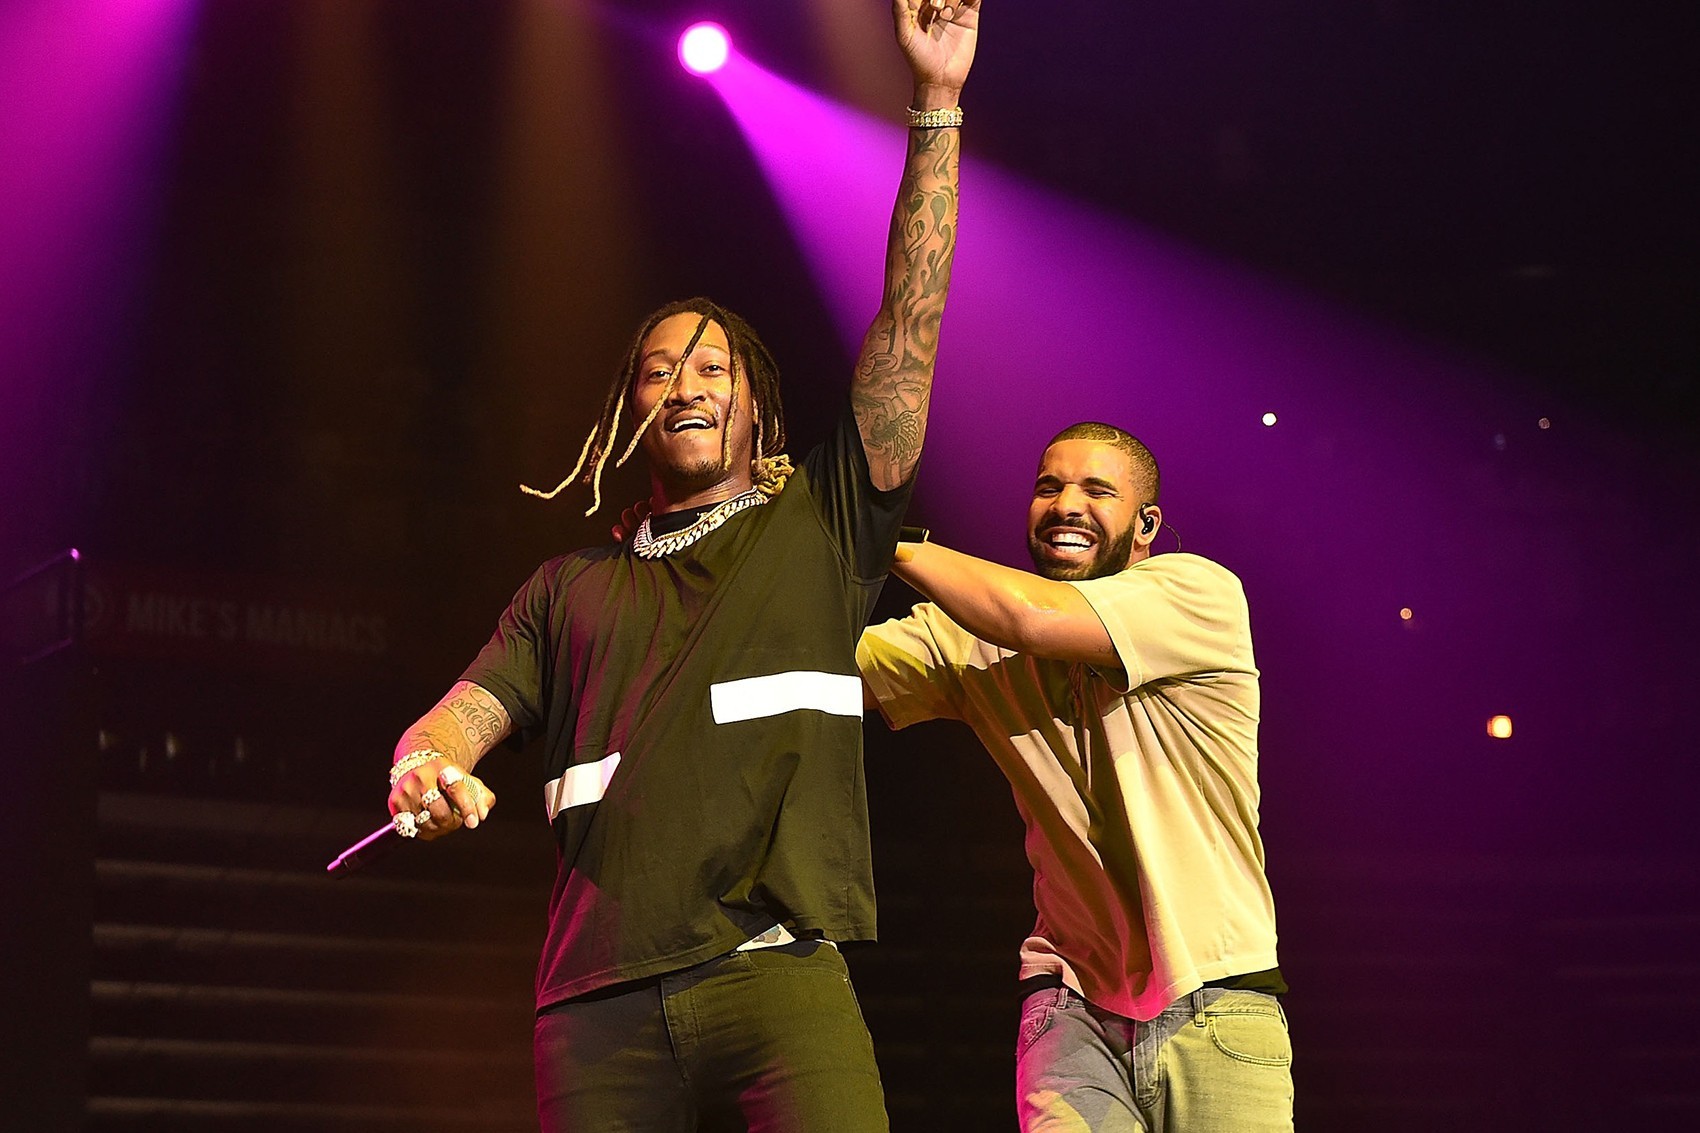 Future Previews An Unreleased Collaboration With Drake